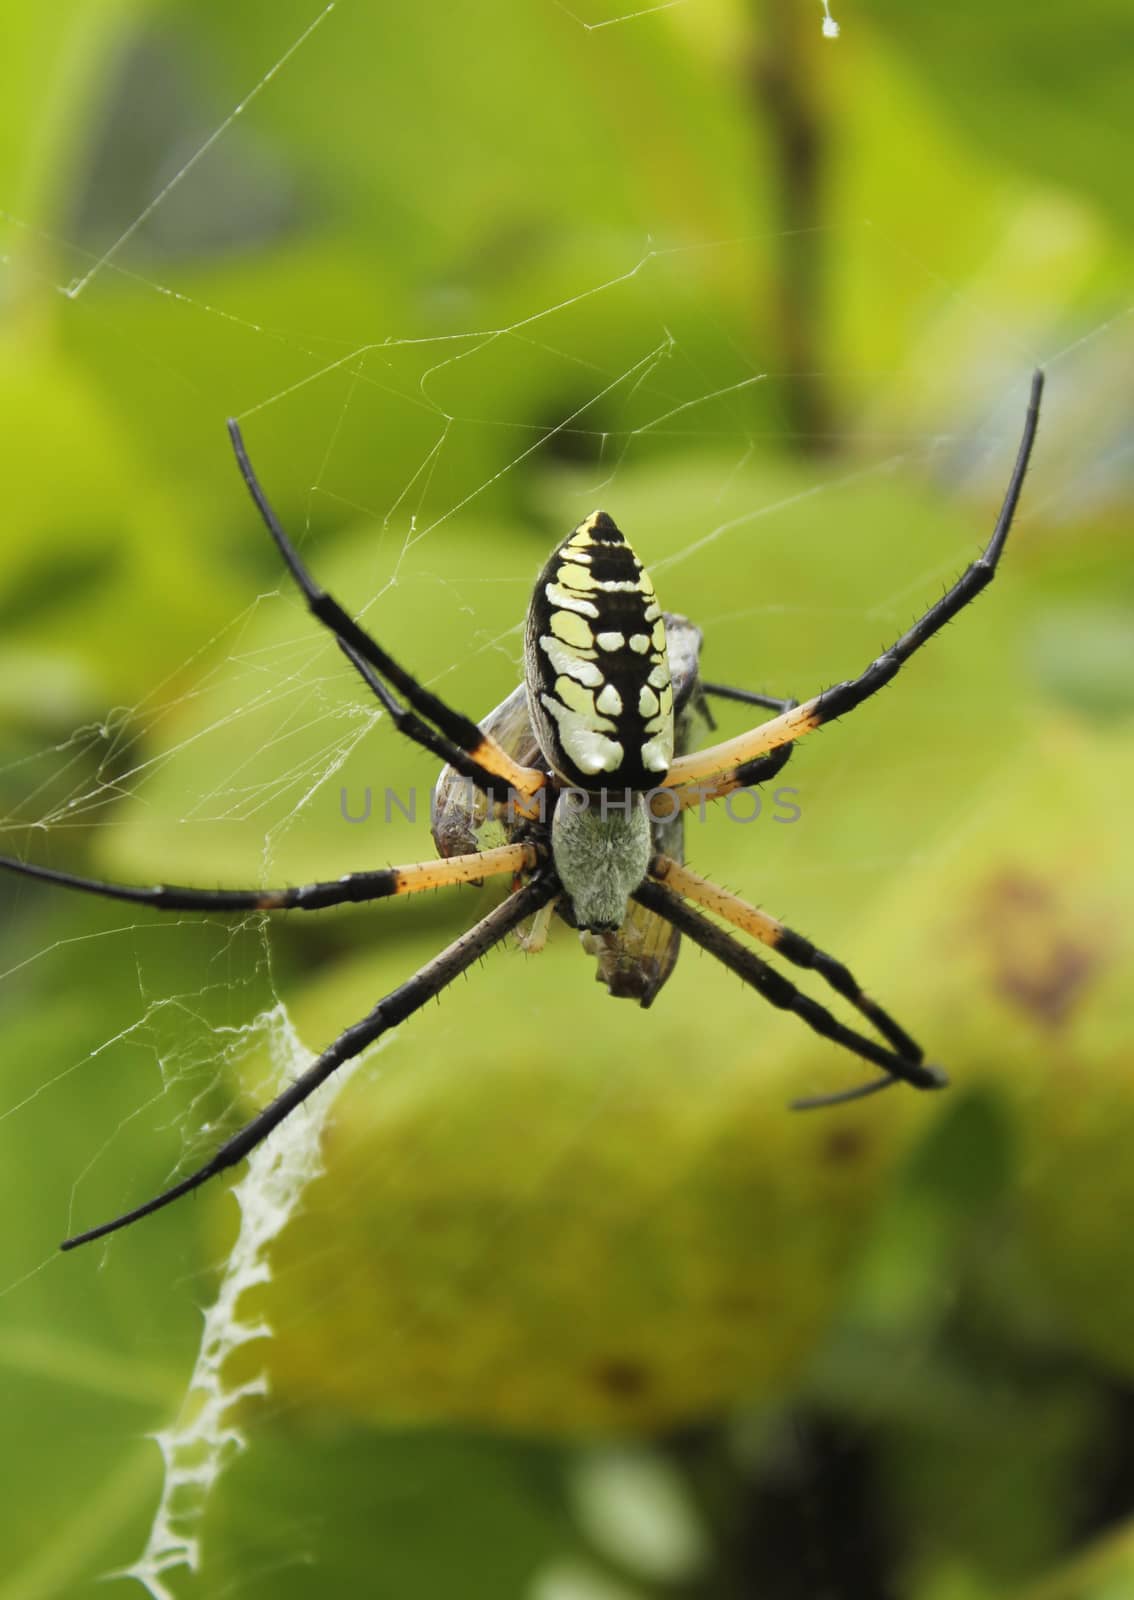 Black and Yellow Garden Spider Argiope aurantia,  Eating Prey in Fig Tree